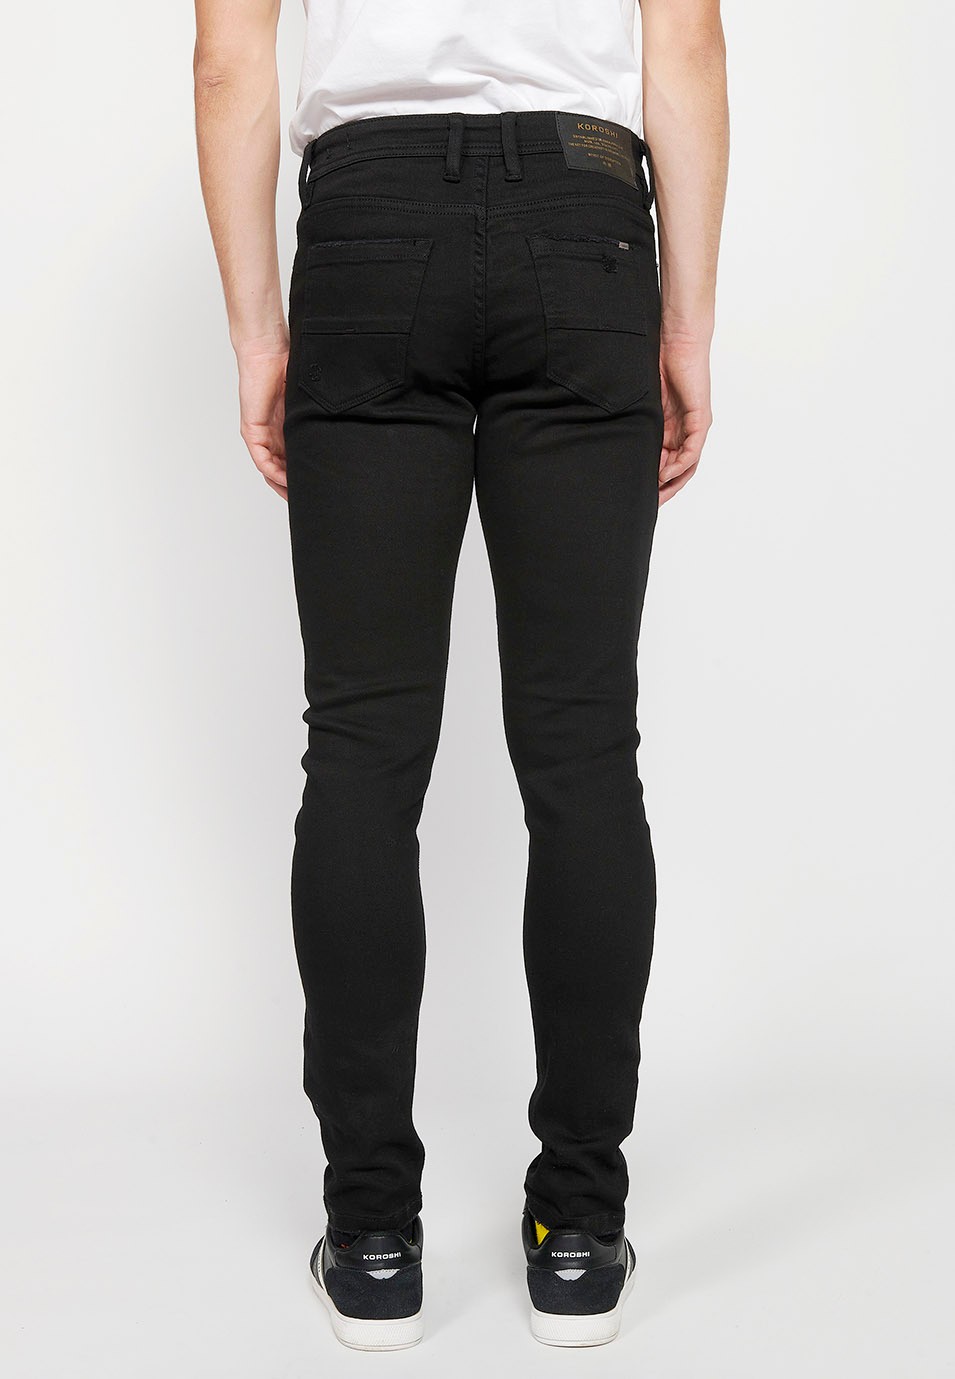 Long slim super skinny jeans with front closure with zipper and button in Black Denim Color for Men 4